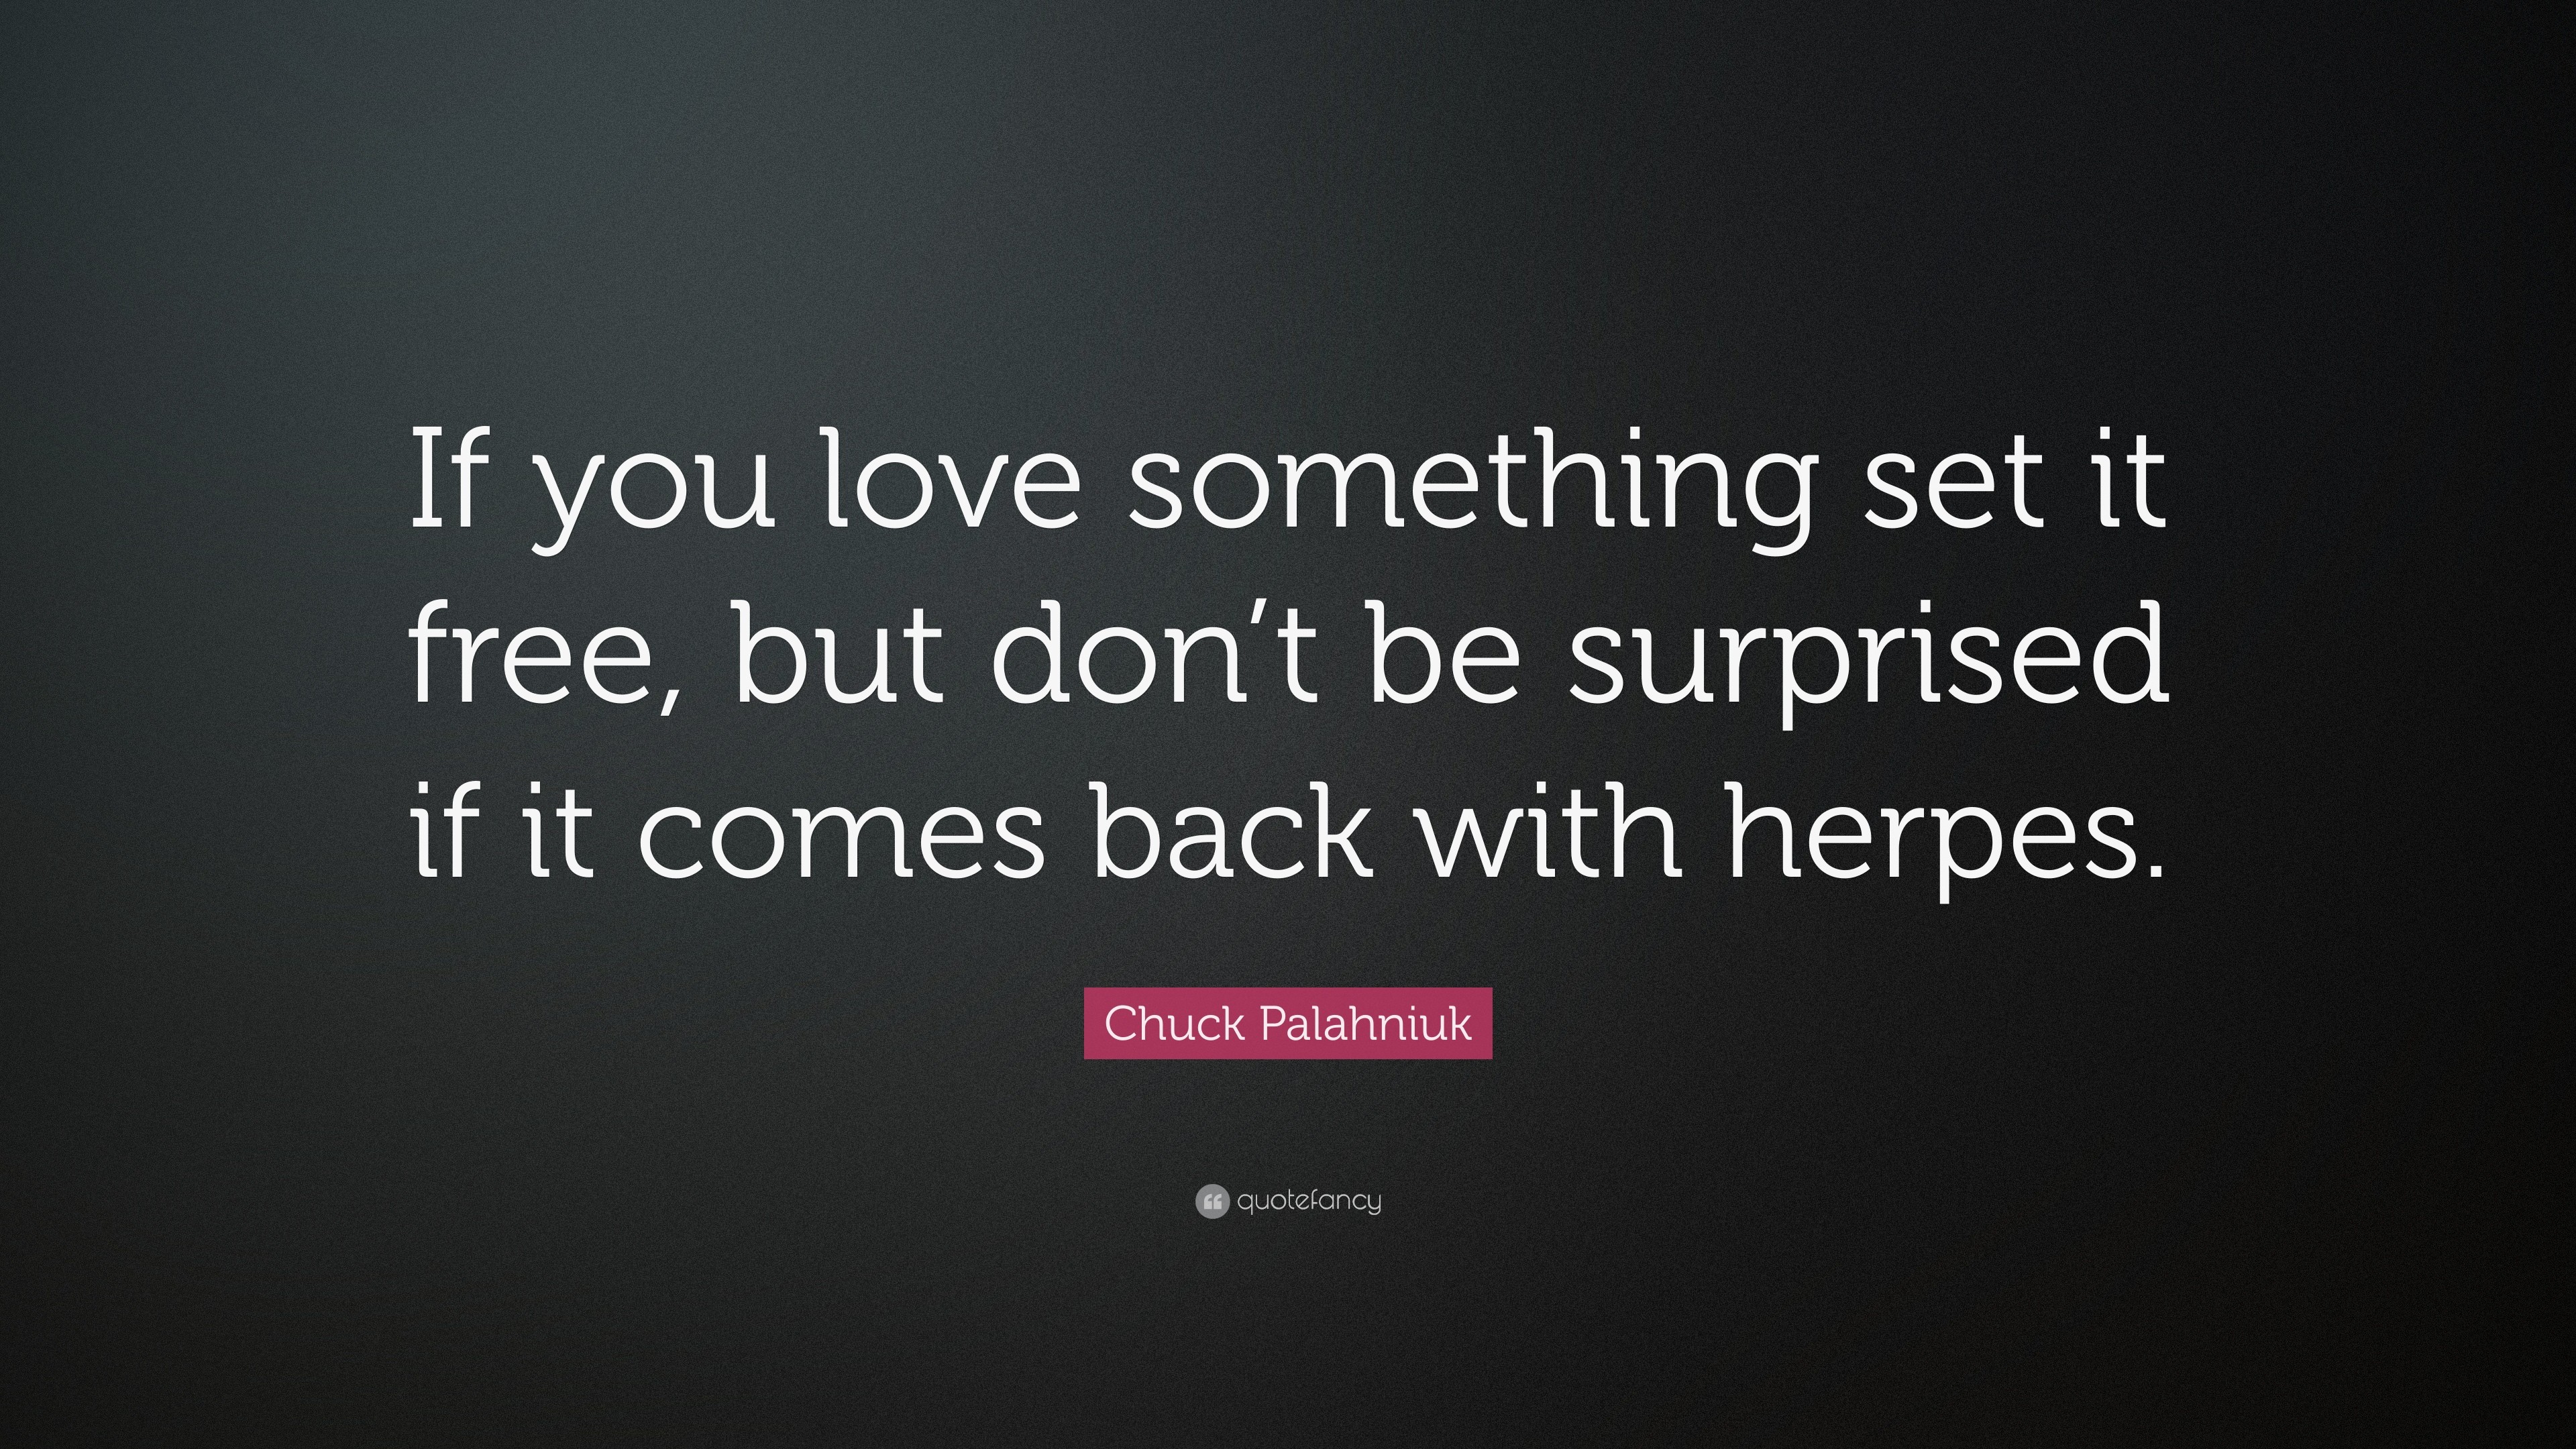 3840x2160 Broken Heart Quotes: “If you love something set it free, but don'